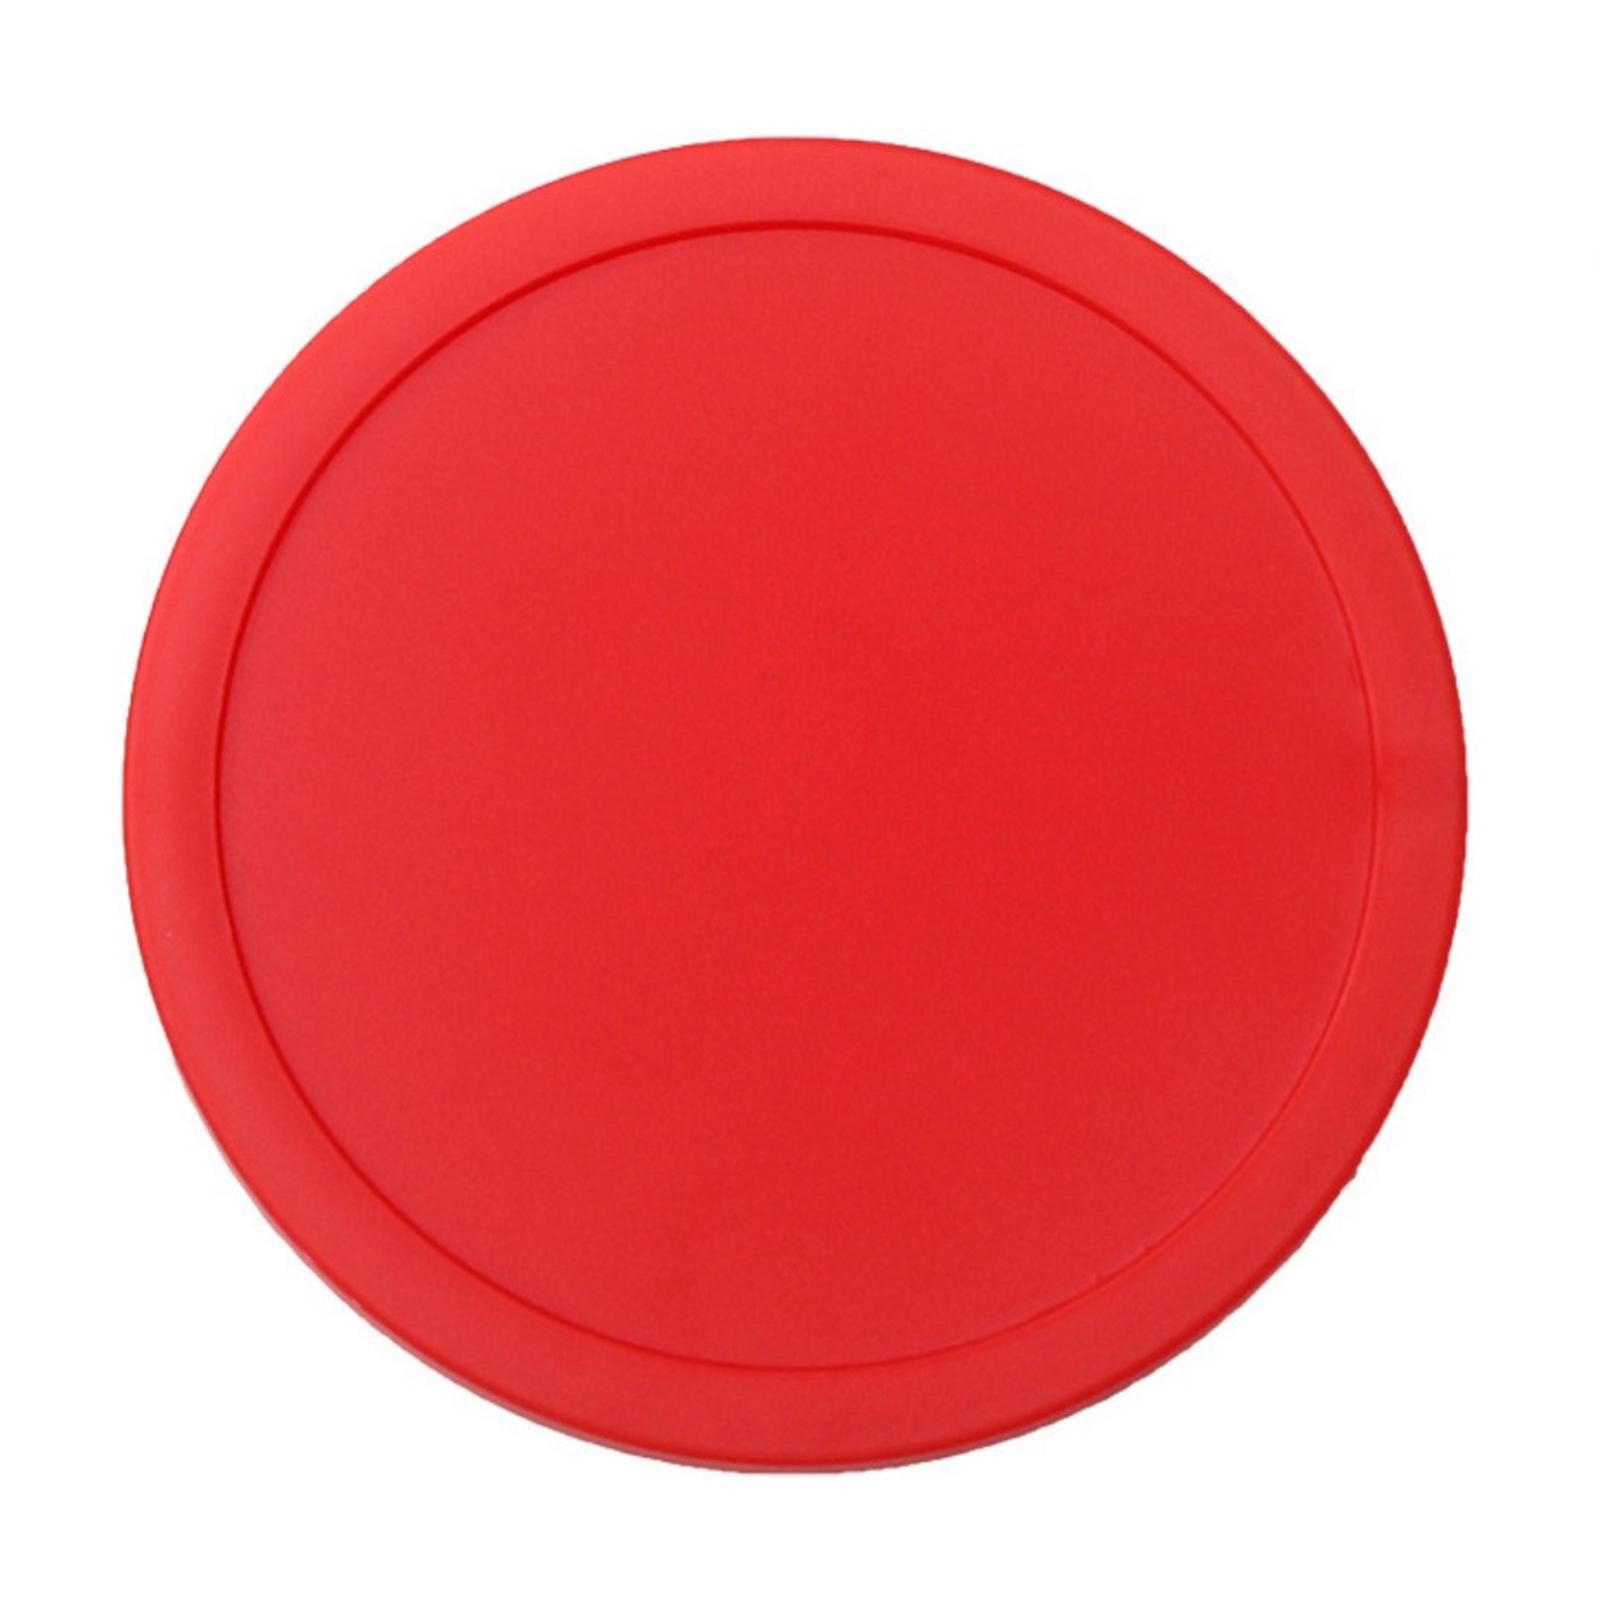 2PCS Plastic Air Hockey Pushers and 4PCS Pucks Replacement for Game Tables Red